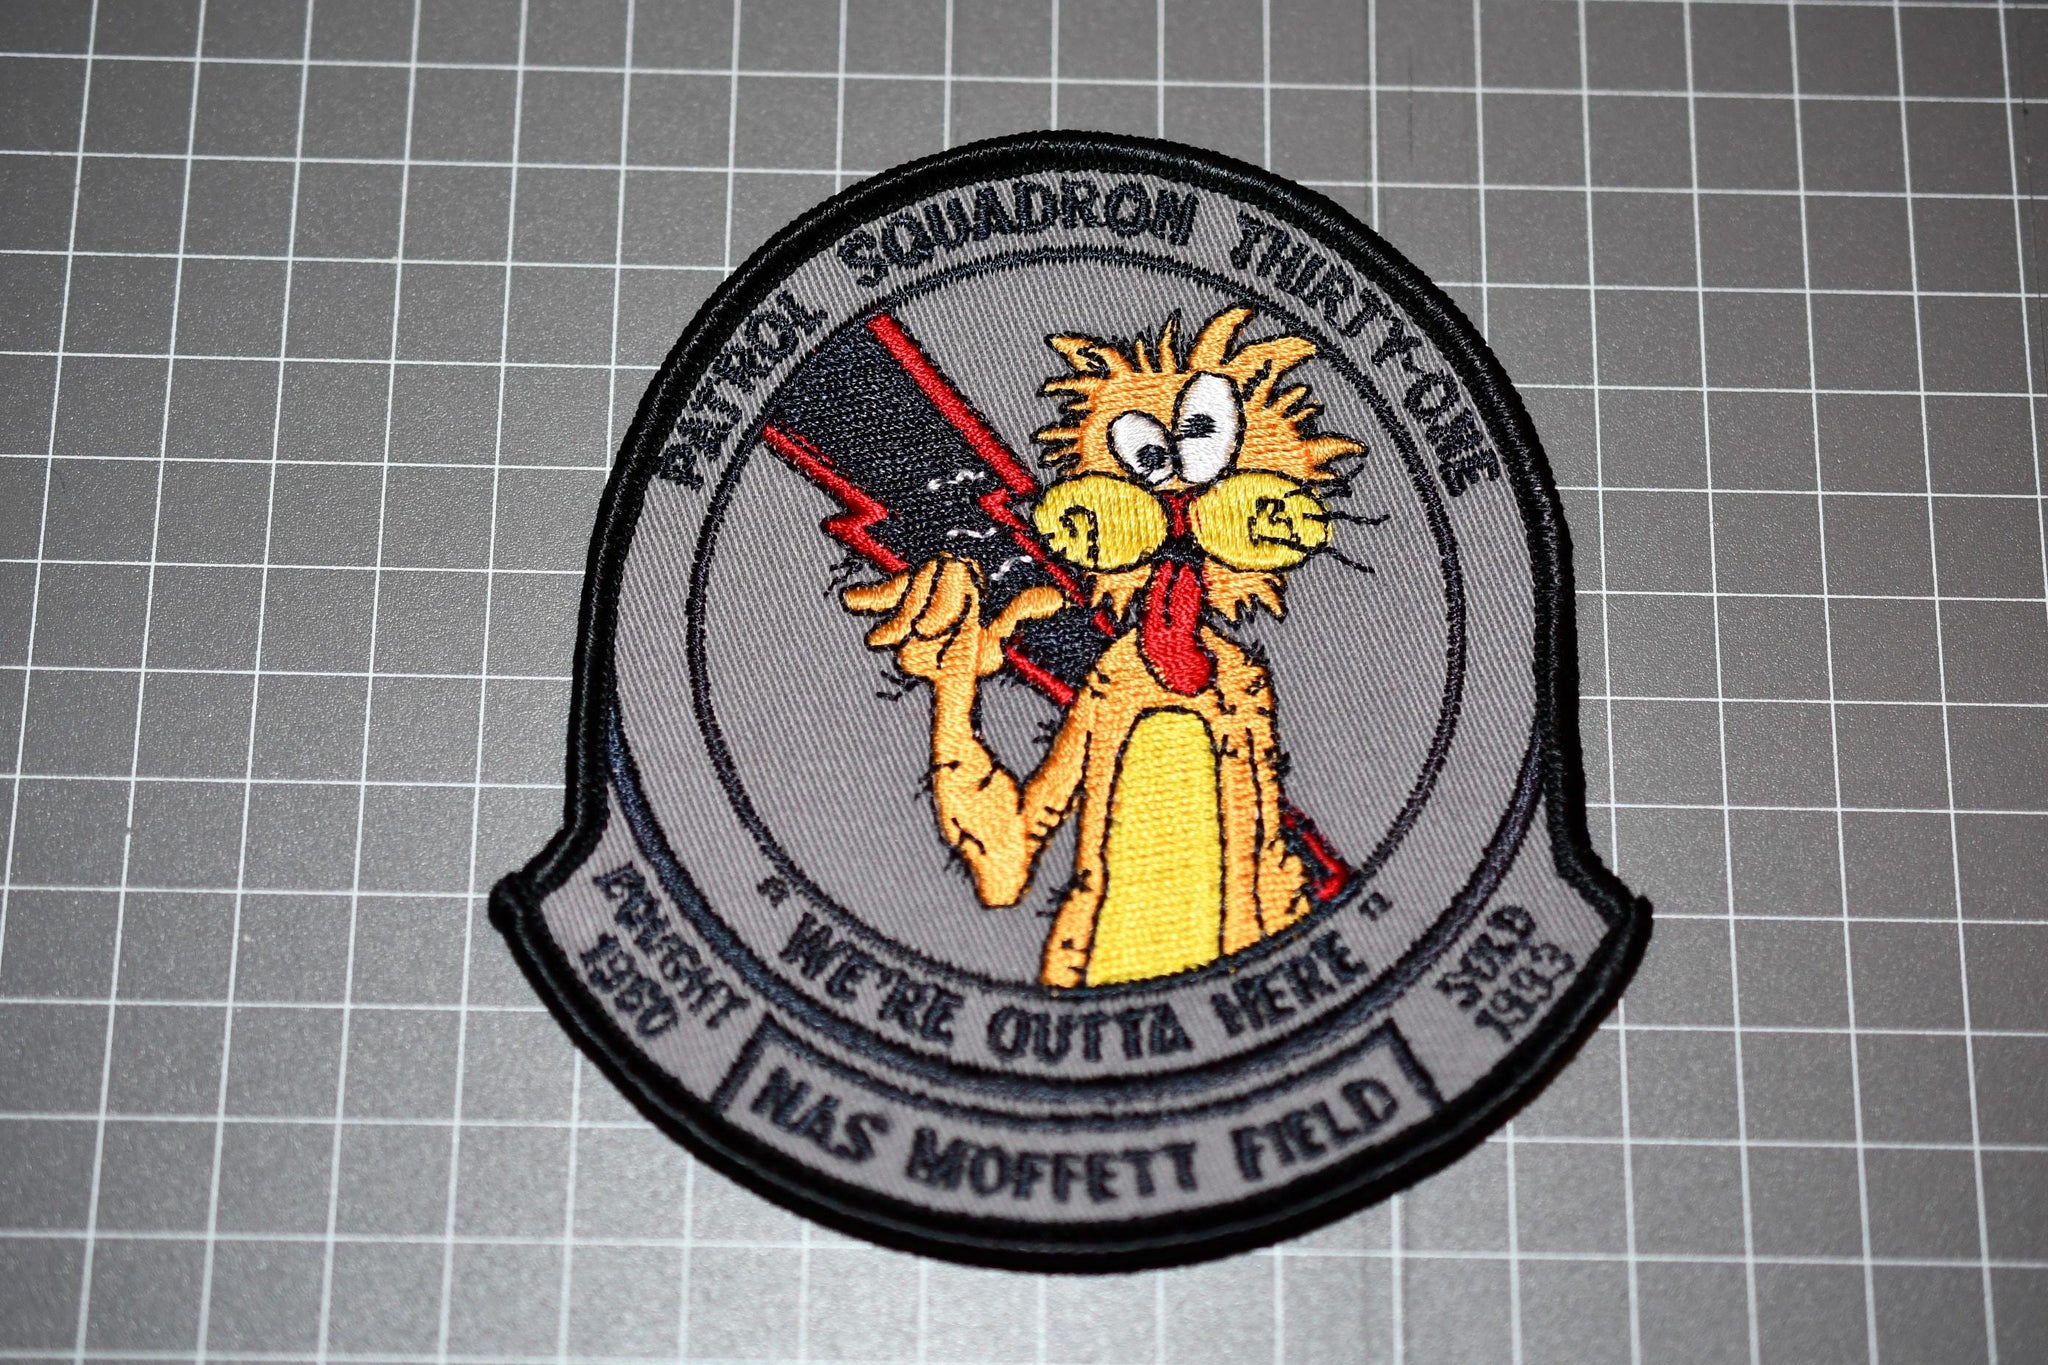 USN Patrol Squadron Thirty-One NAS Moffett Field "We're Outta Here" Patch (B10-102)